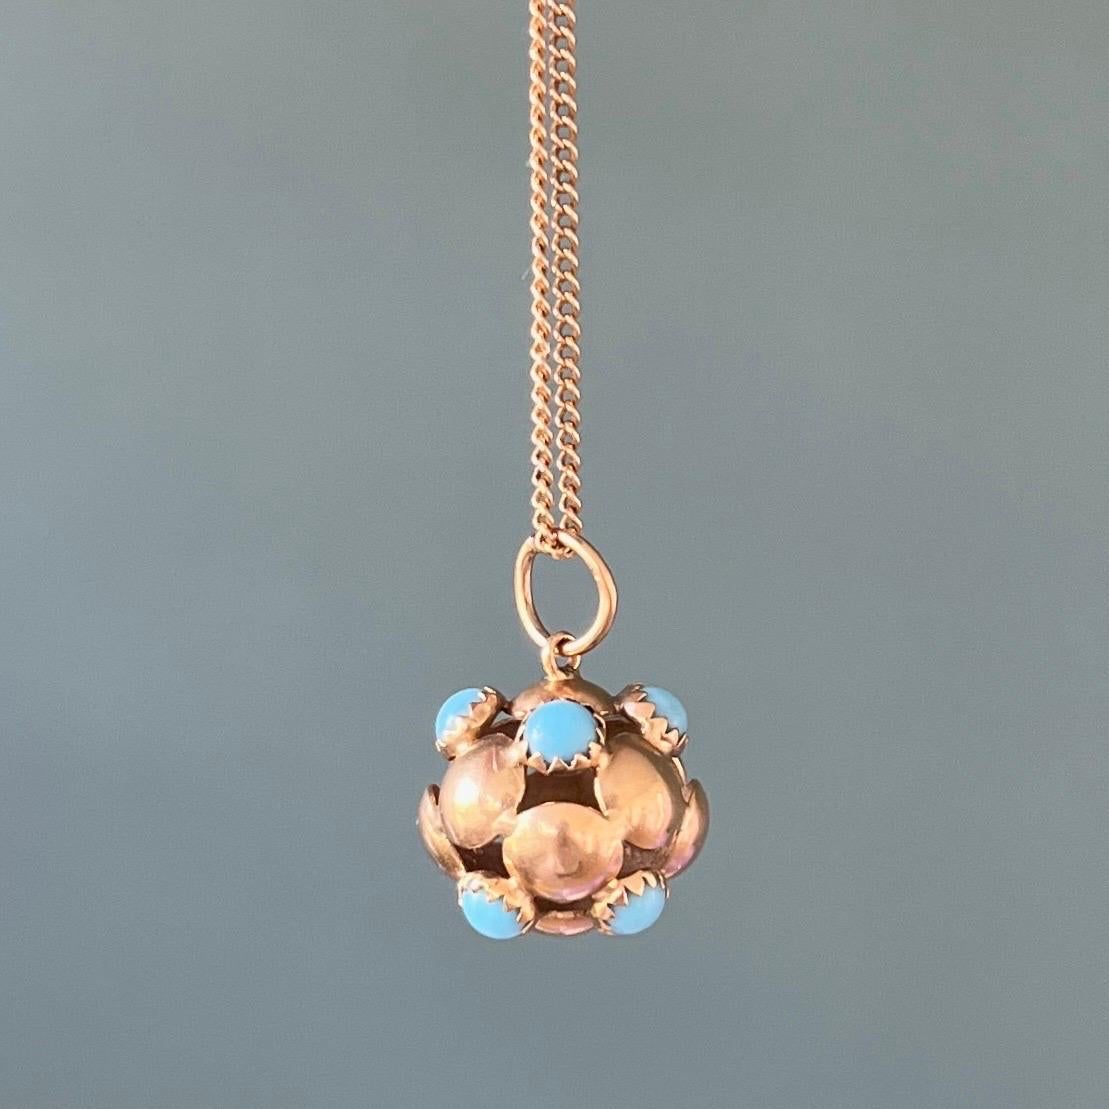 A vintage 18 karat yellow gold and turquoise ball charm pendant. The charm is marvelous and beautifully crafted with turquoise cabochon stones around the body. The gold of the ball is interspersed with an openwork structure between each gold